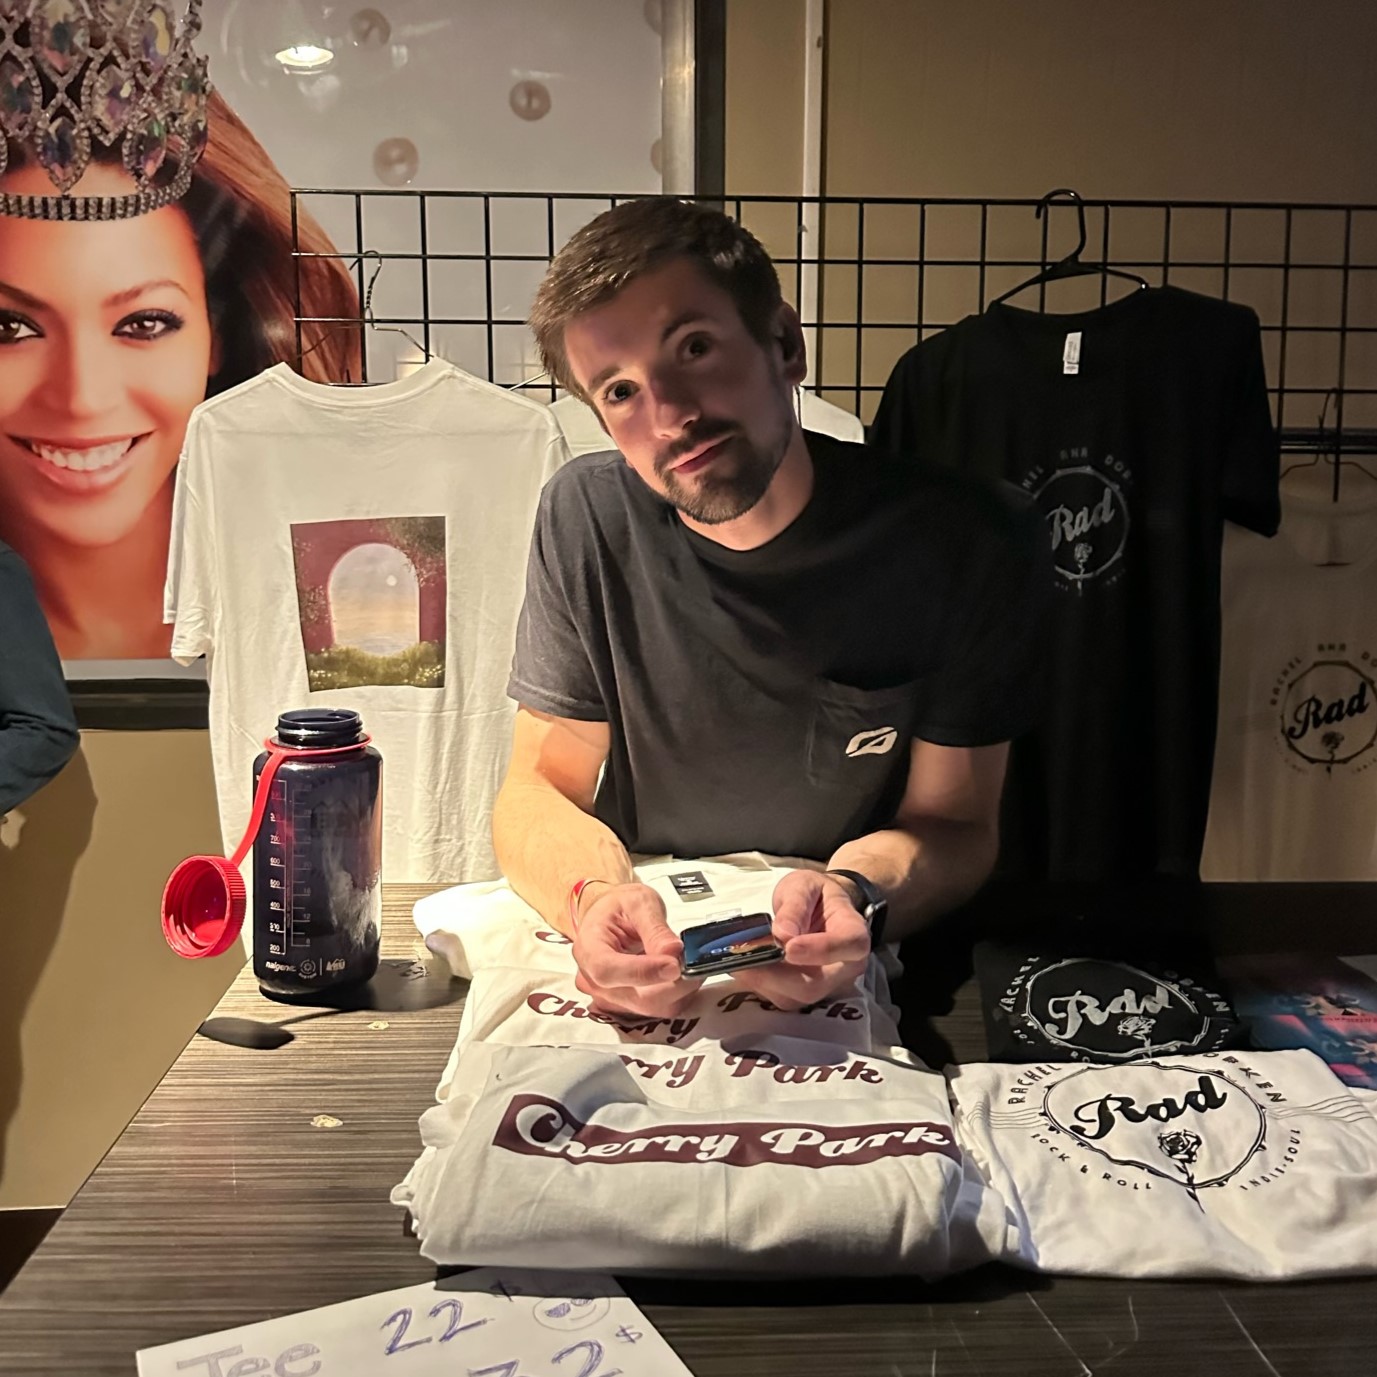 Band member standing behind merchandise table, looking at the camera